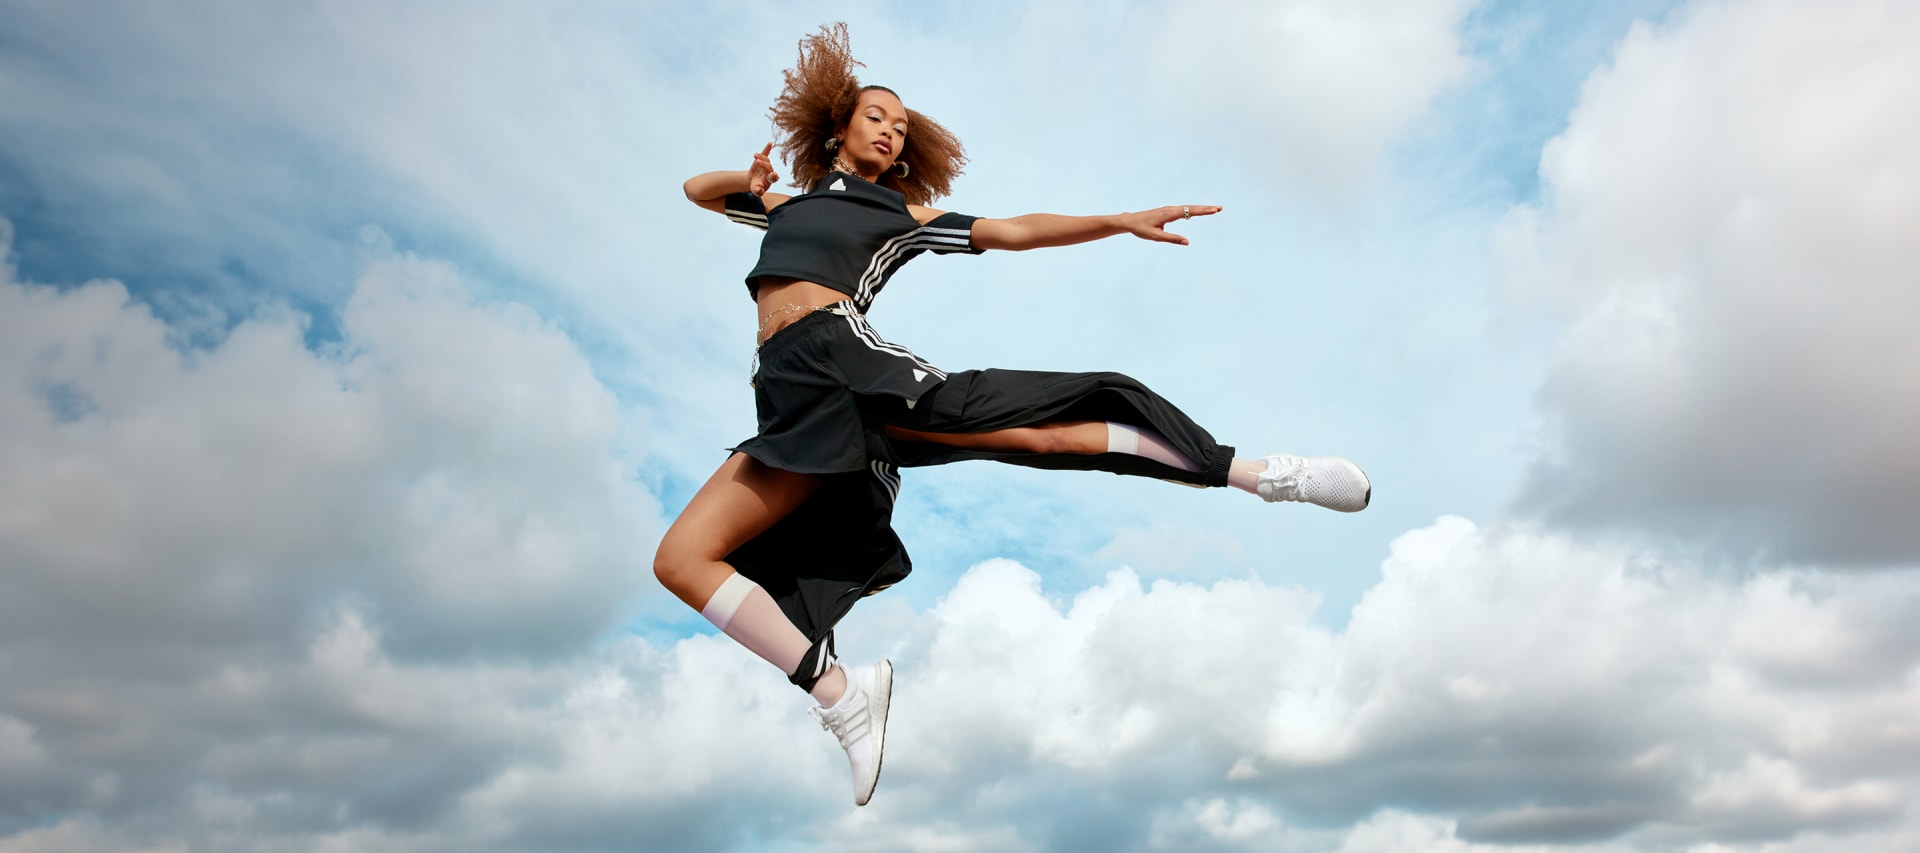 Female model with curly hair jumping into the air. She is wearing a black adidas crop top with cut out shoulders, a black adidas mini skirt over black adidas track pants with a slit in the front, and white socks and sneakers.